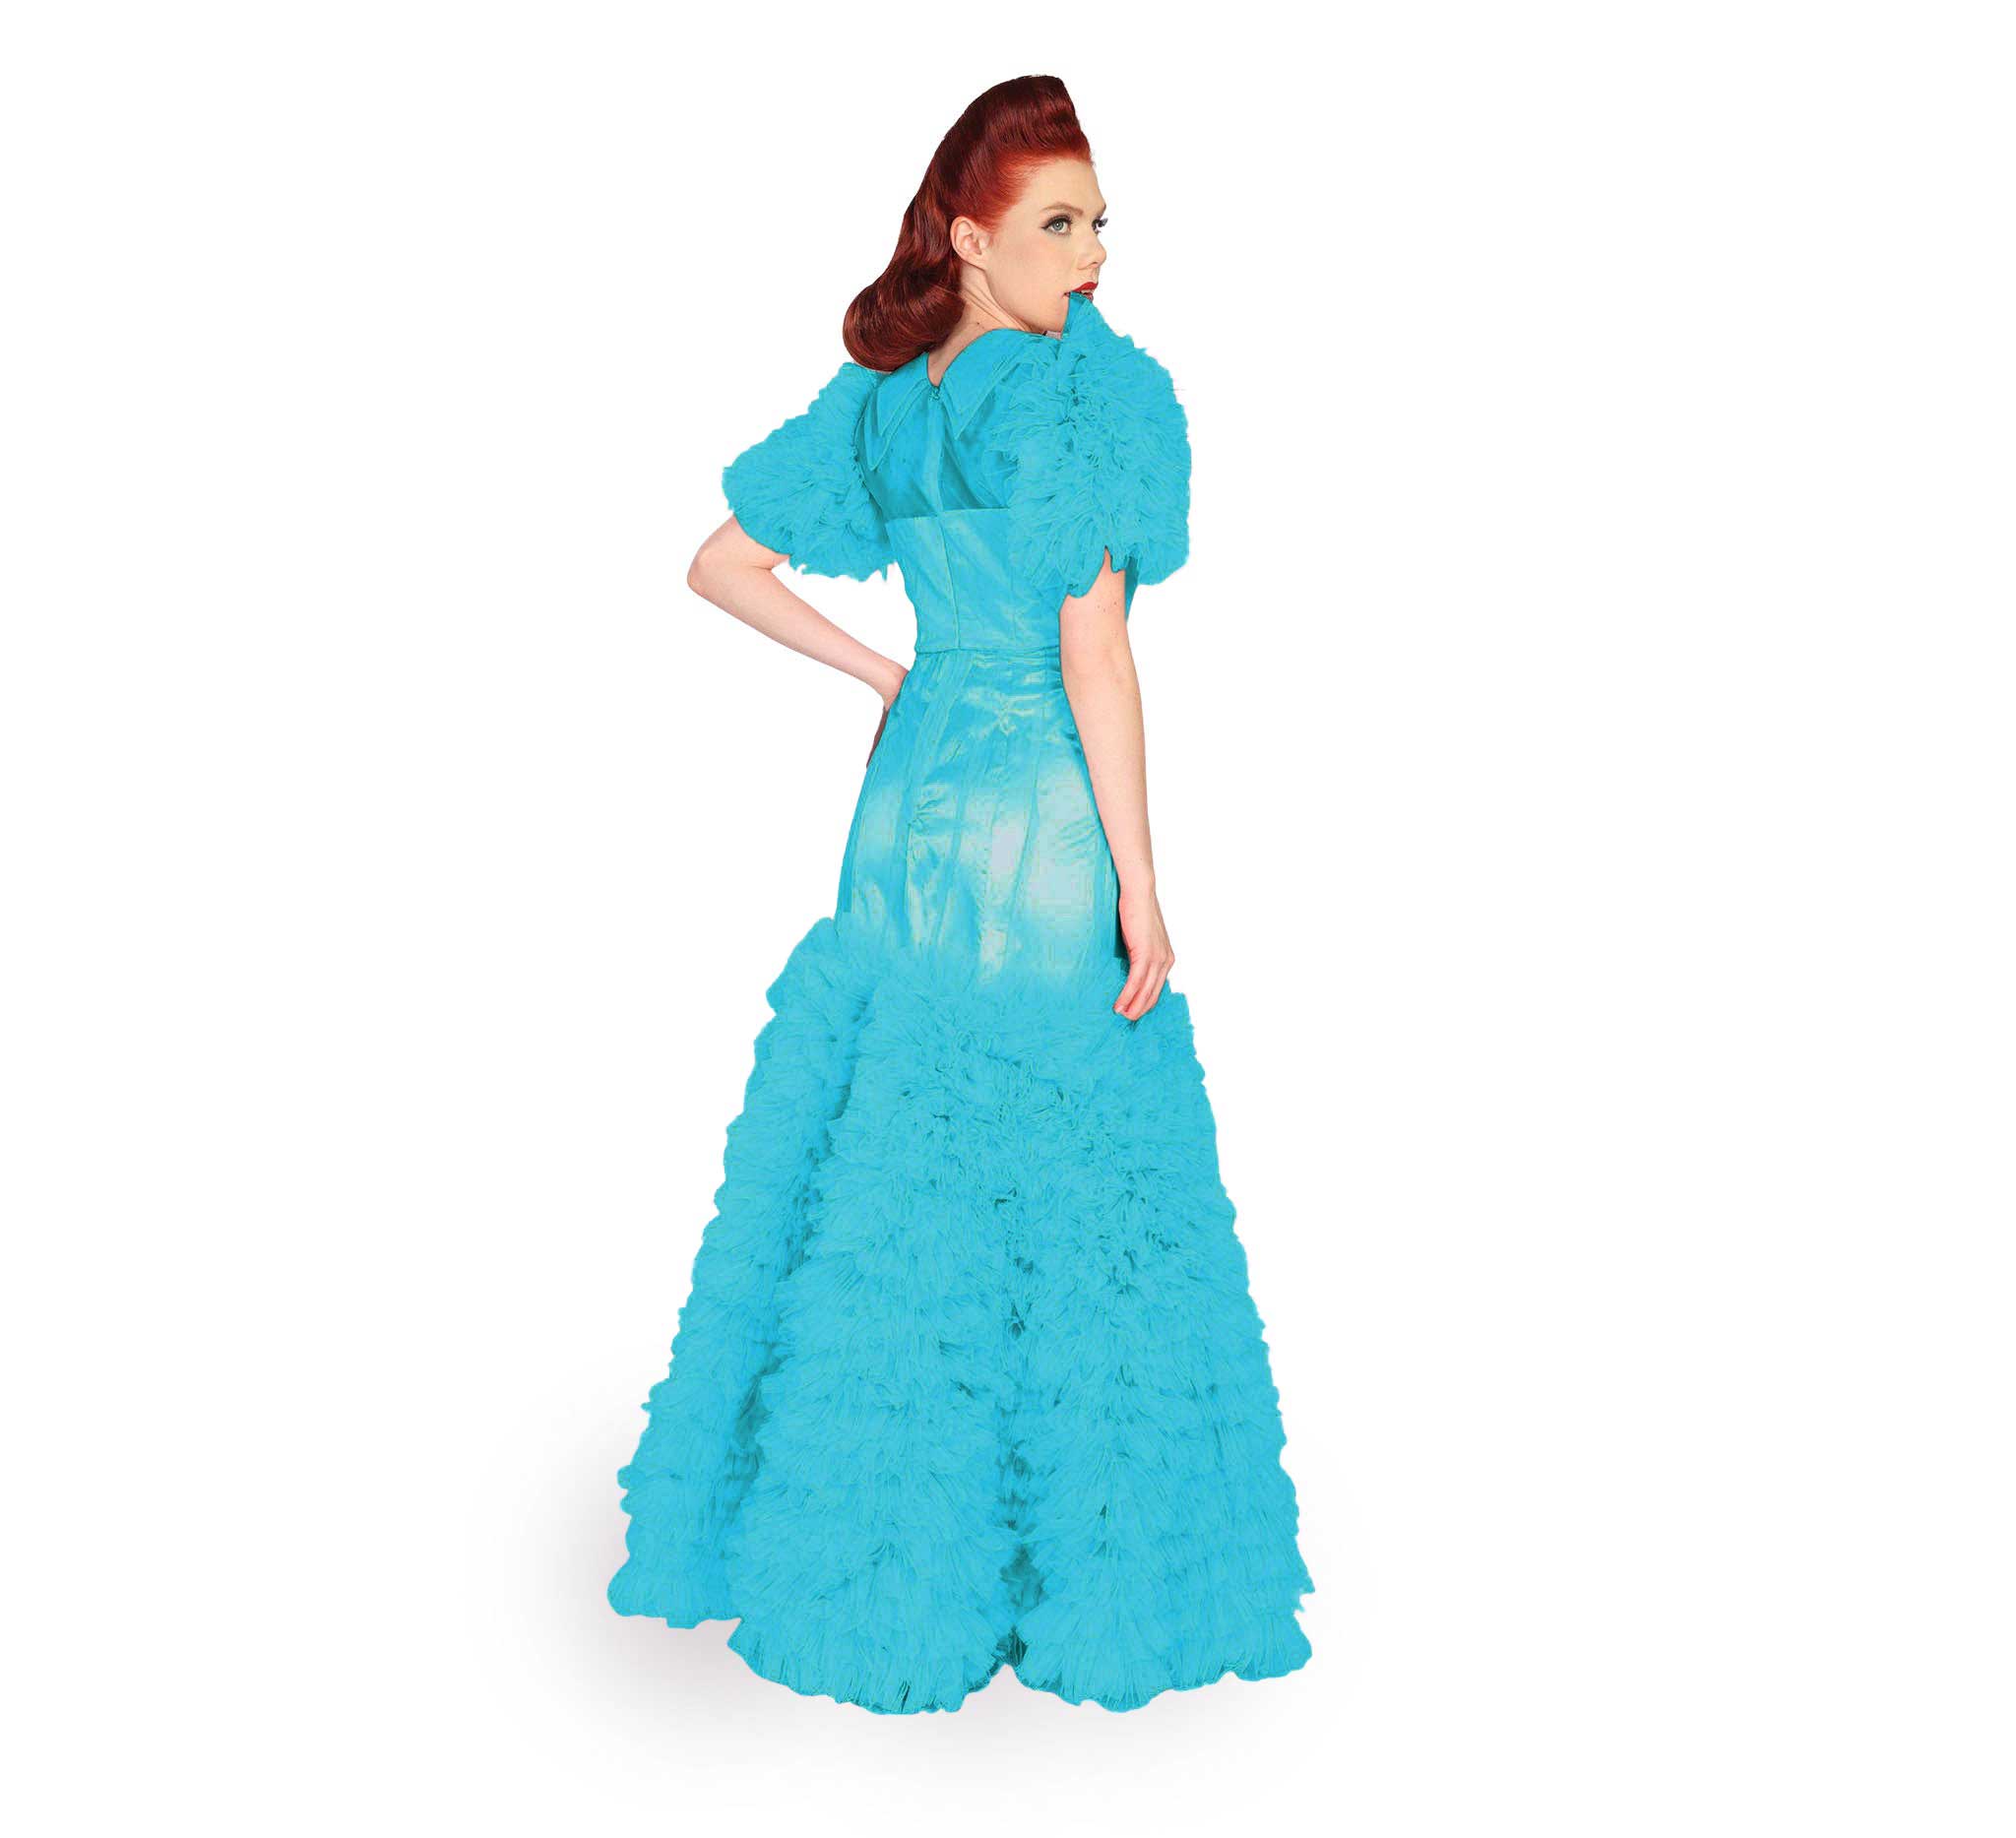 "Astaire" Gown